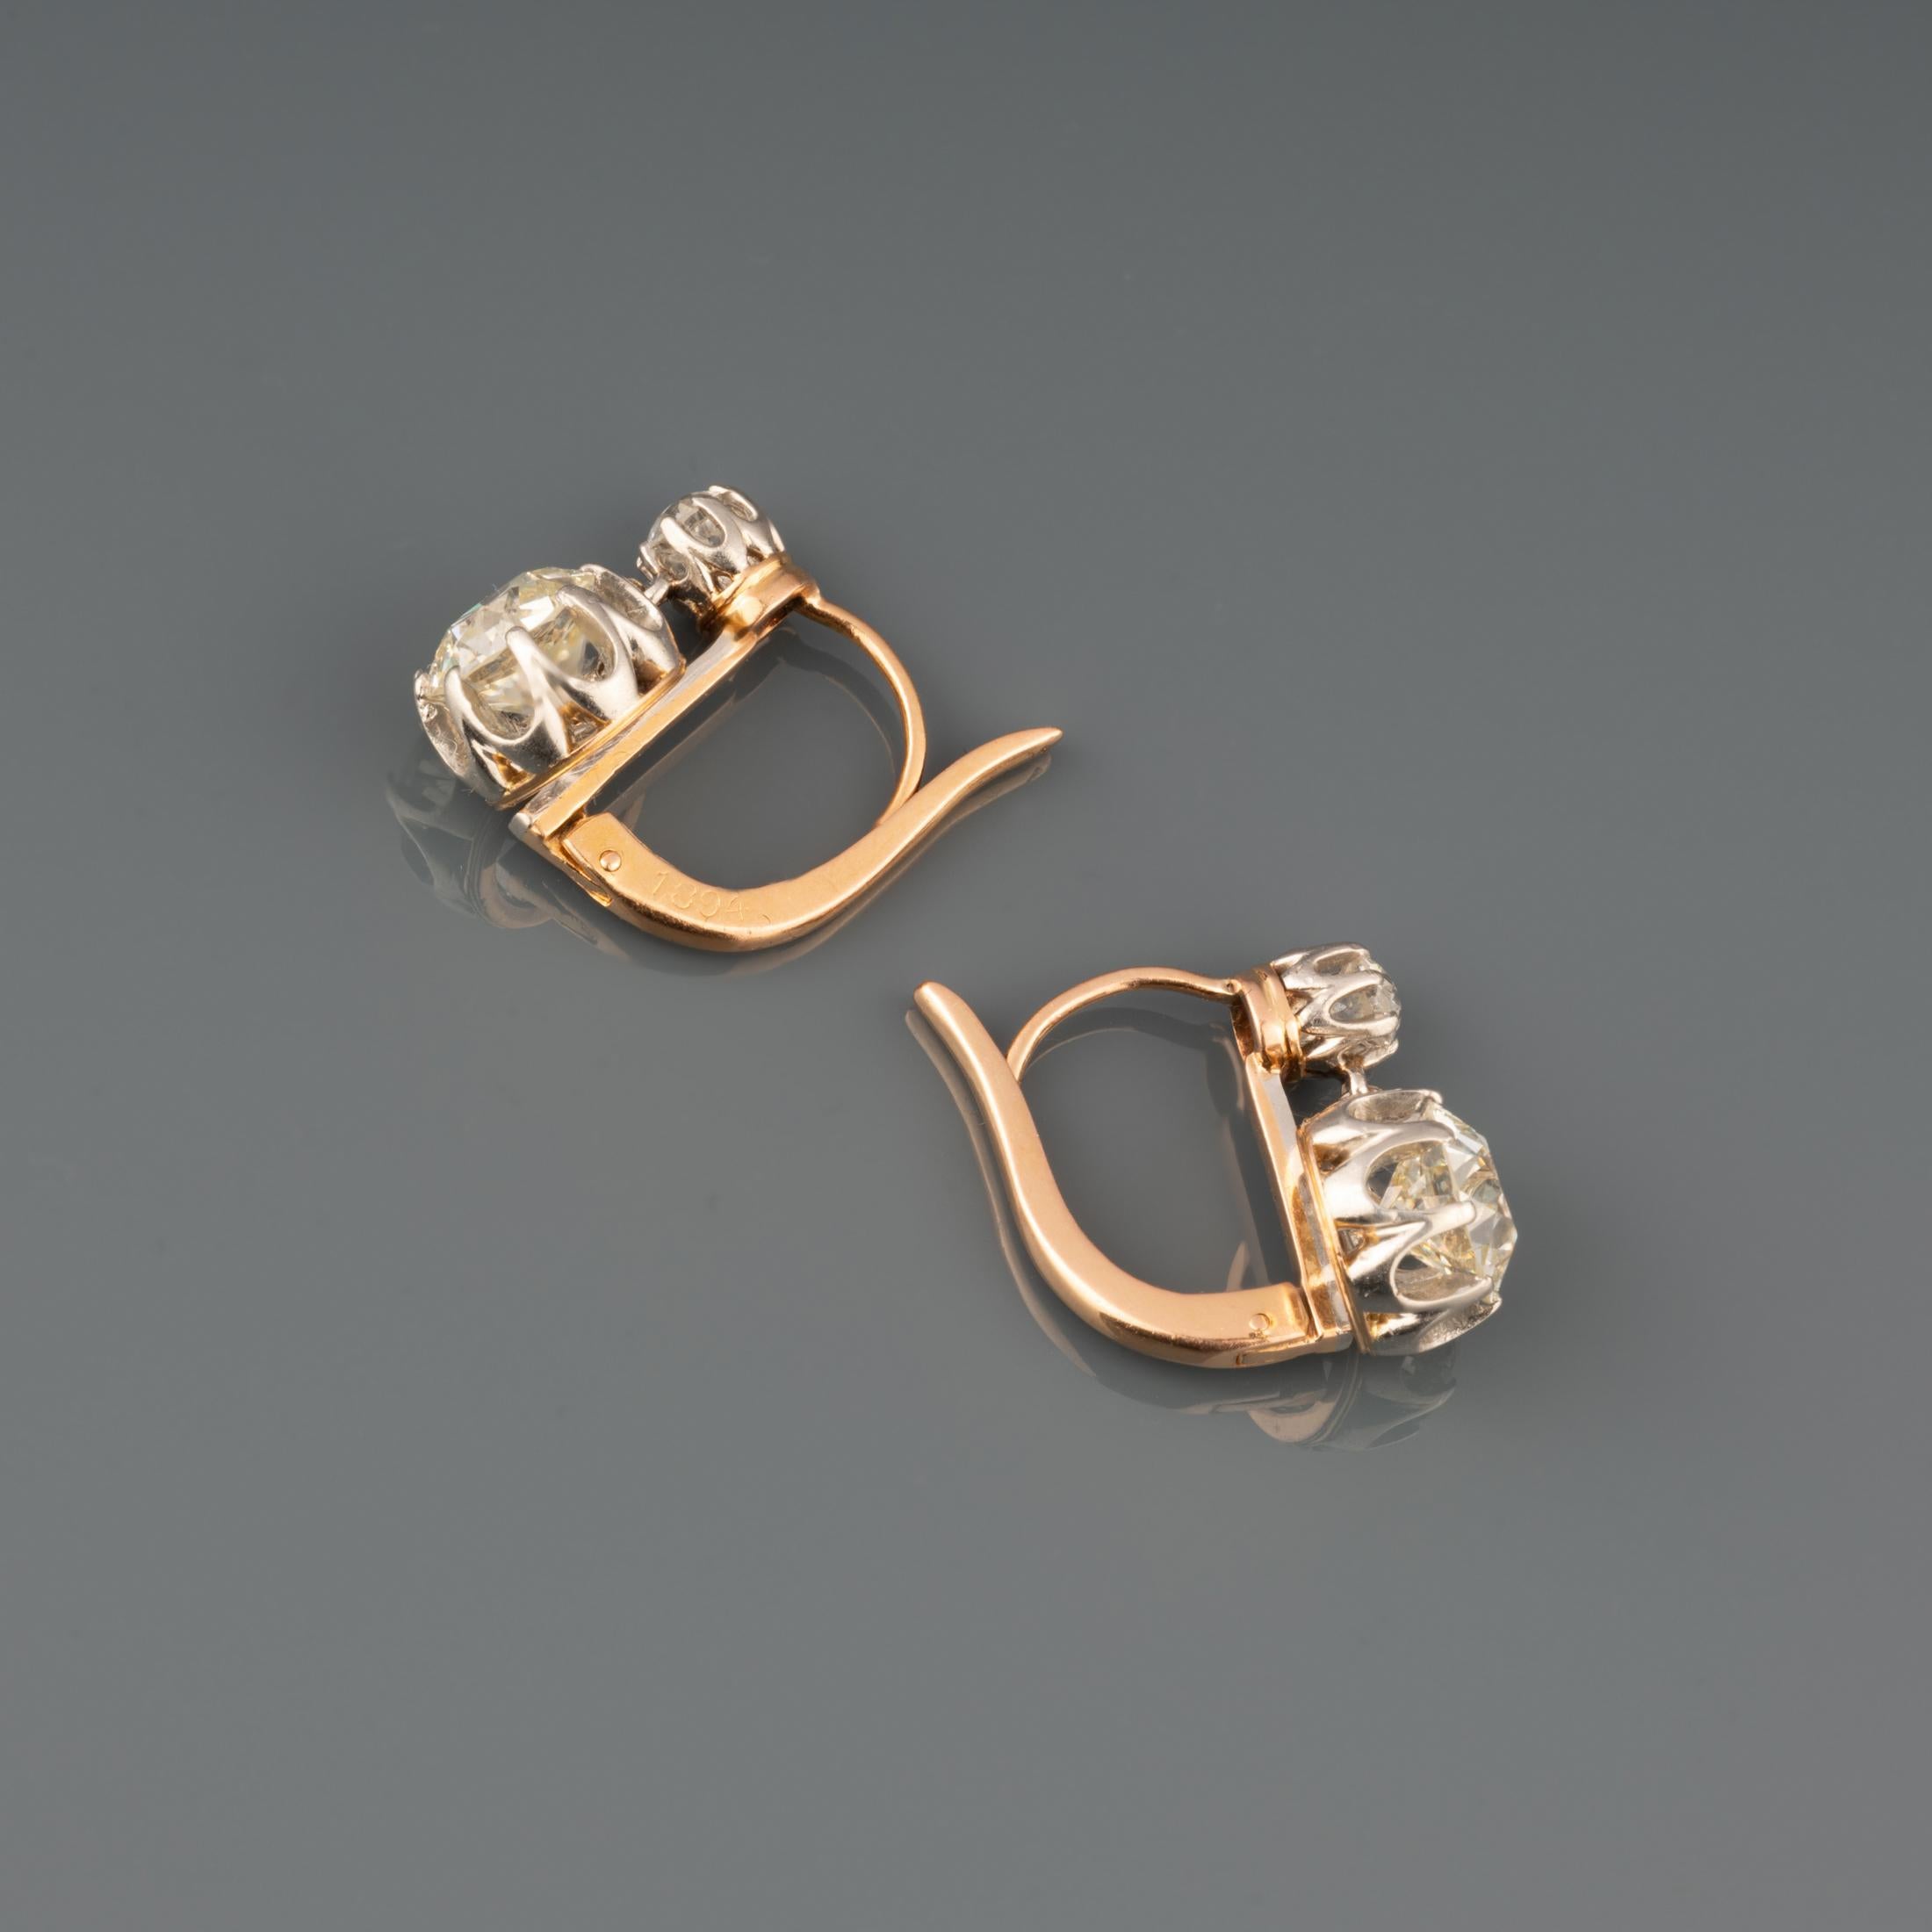 A very lovely antique pair of earrings, made in France circa 1900.  (There is a number 1894, maybe the date of making).

Made in rose gold 18k and platinum.

The two principal round old European cut diamonds weights 1.25 Carats each approximately.